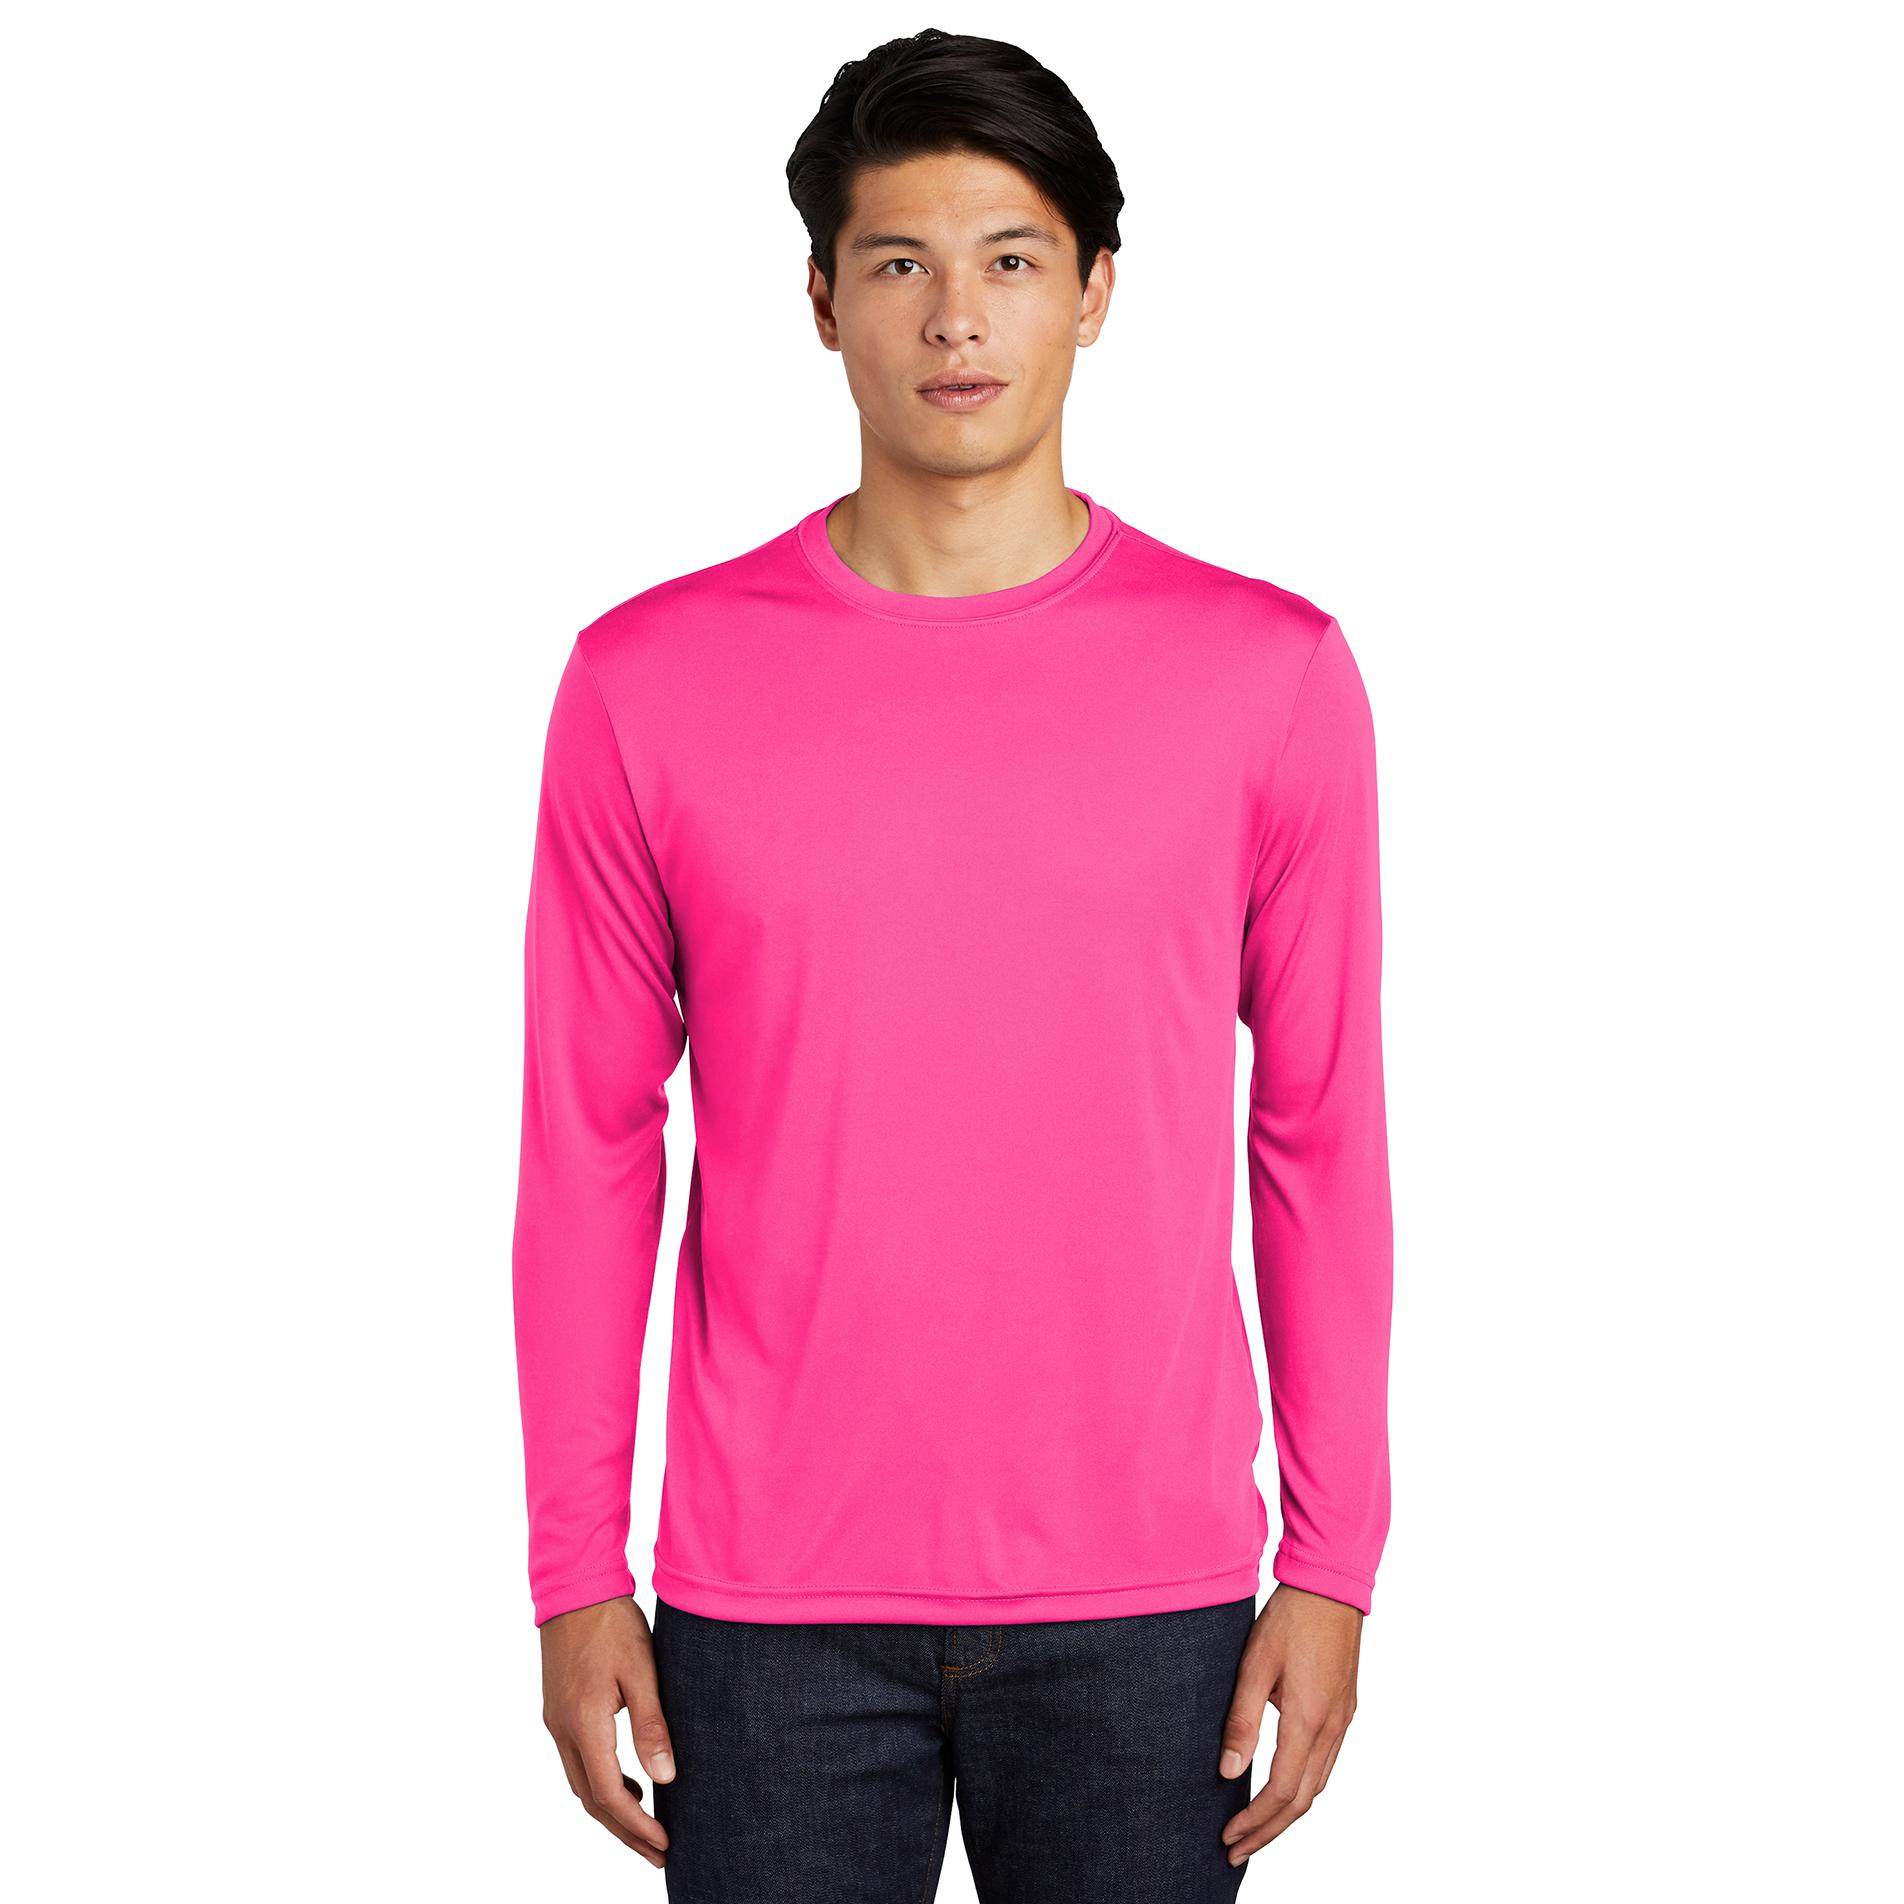 ST350LS Tee Pink Long | Full PosiCharge - Sport-Tek Source Neon Sleeve Competitor